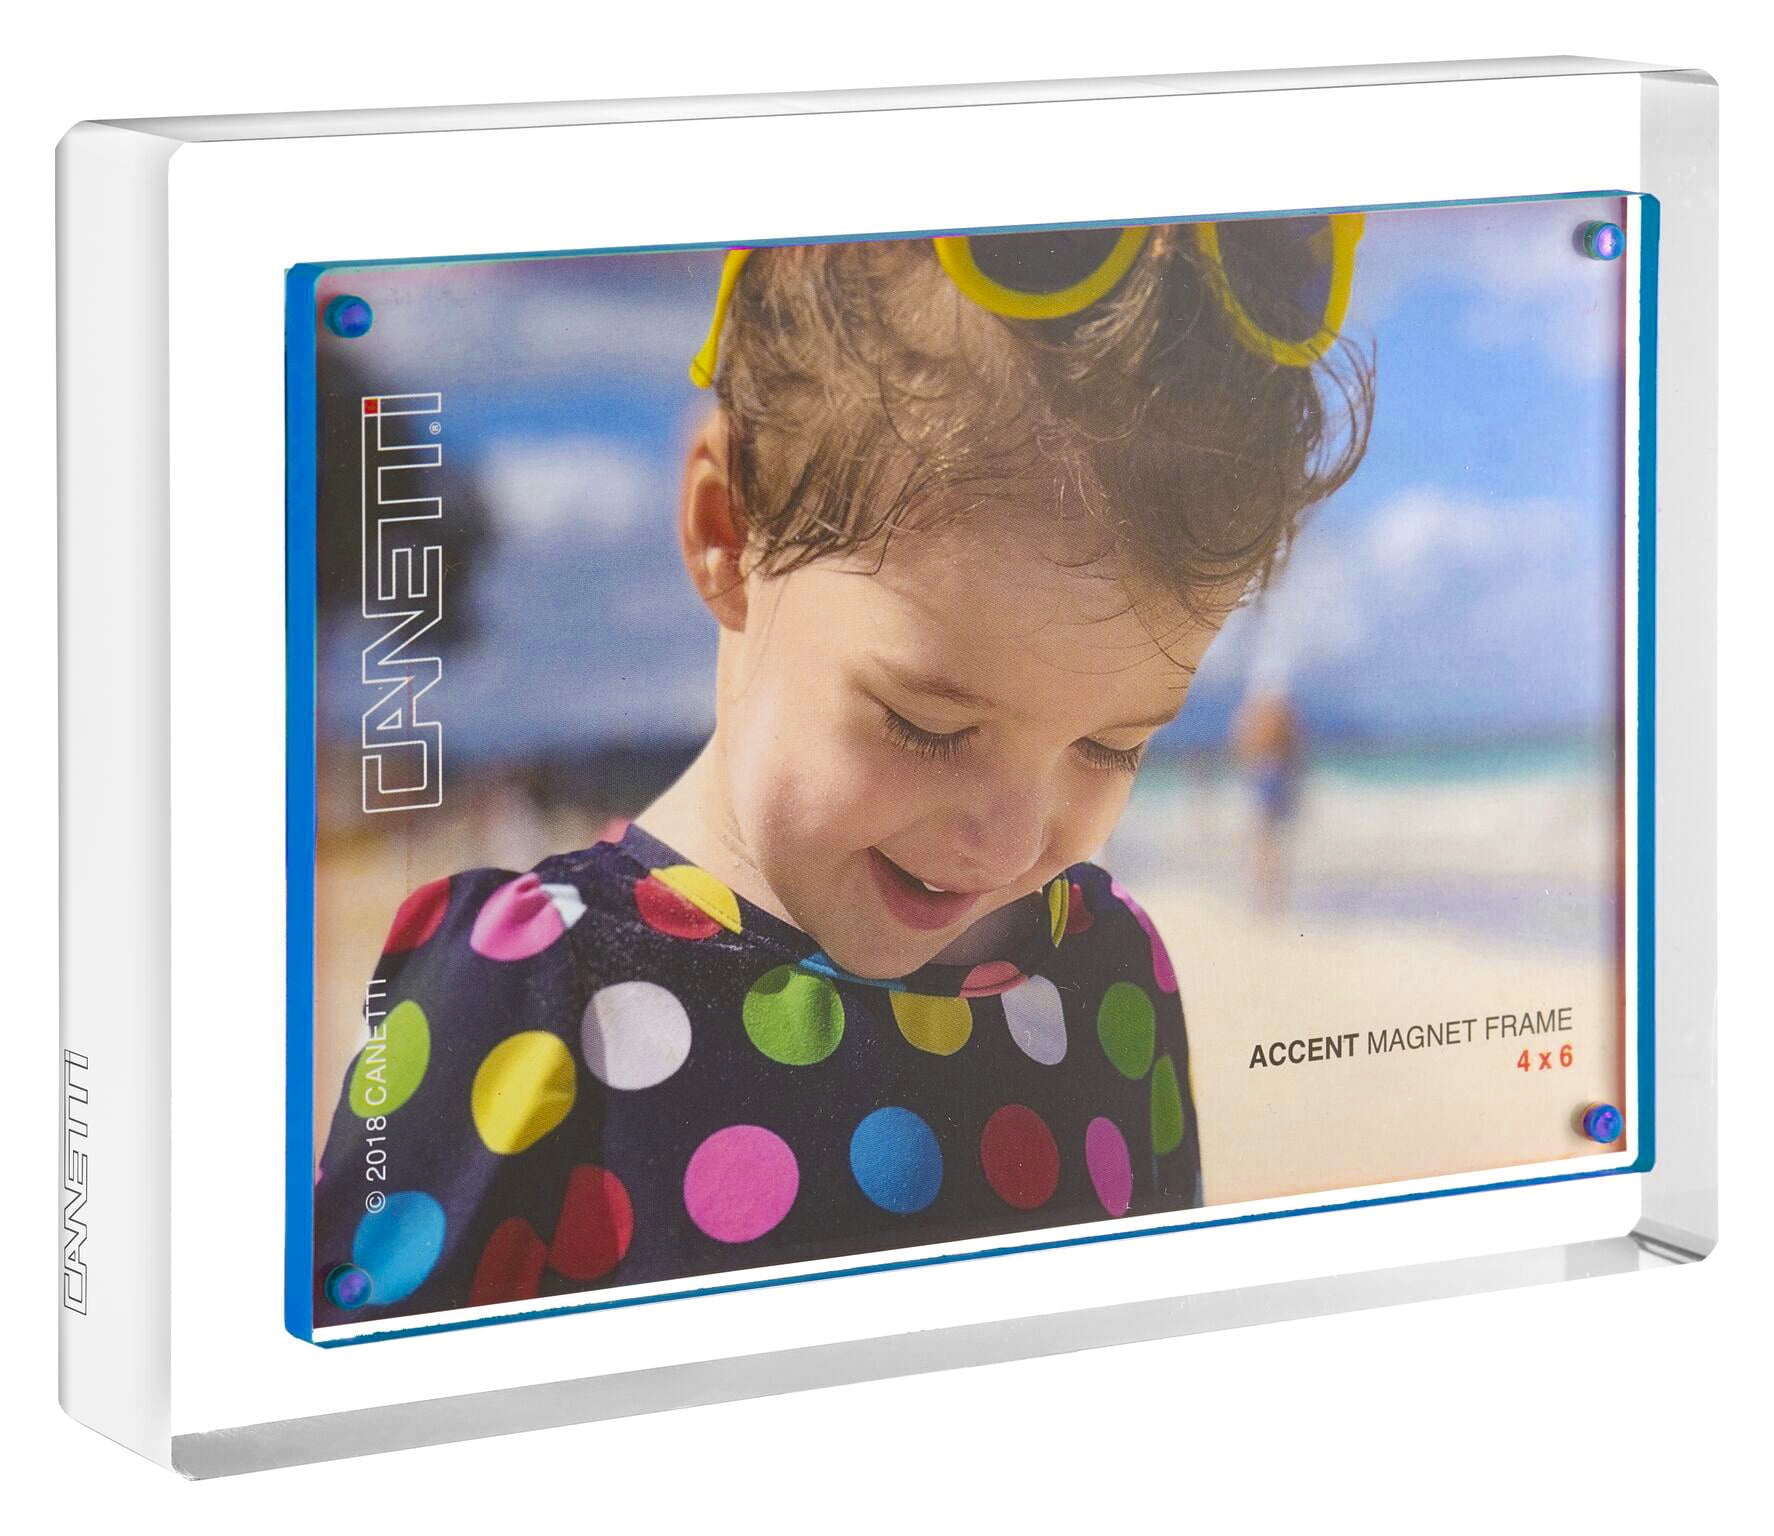 Color Edge Magnet Frame by Canetti-Graphite-5x7 inch